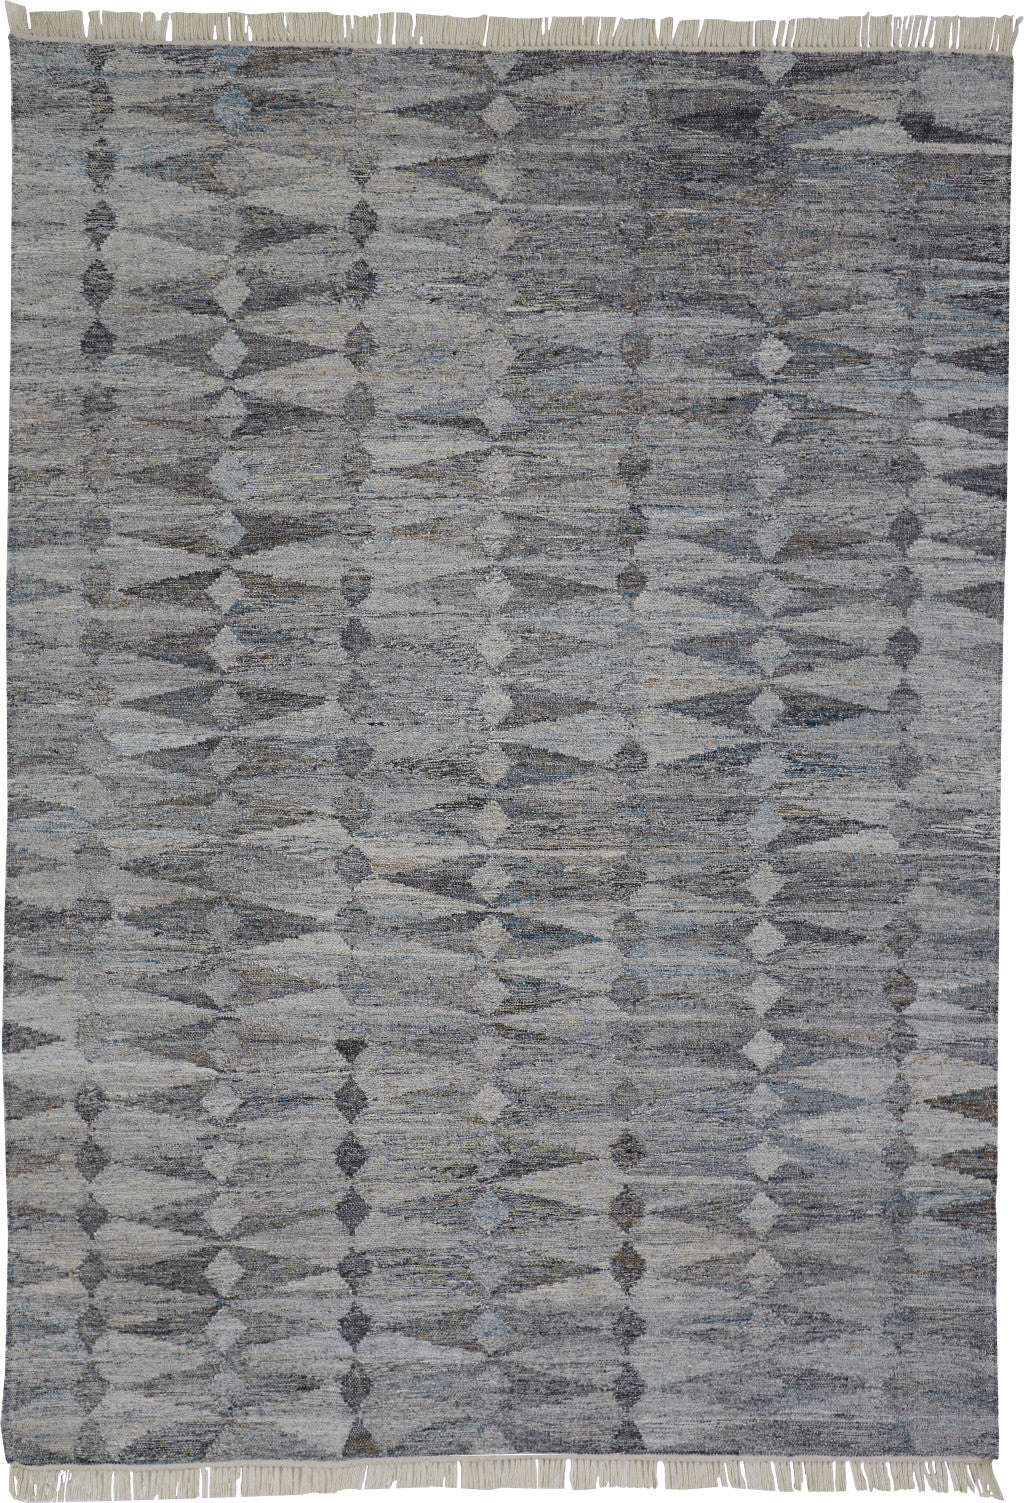 5' X 8' Gray Silver And Ivory Geometric Hand Woven Stain Resistant Area Rug With Fringe